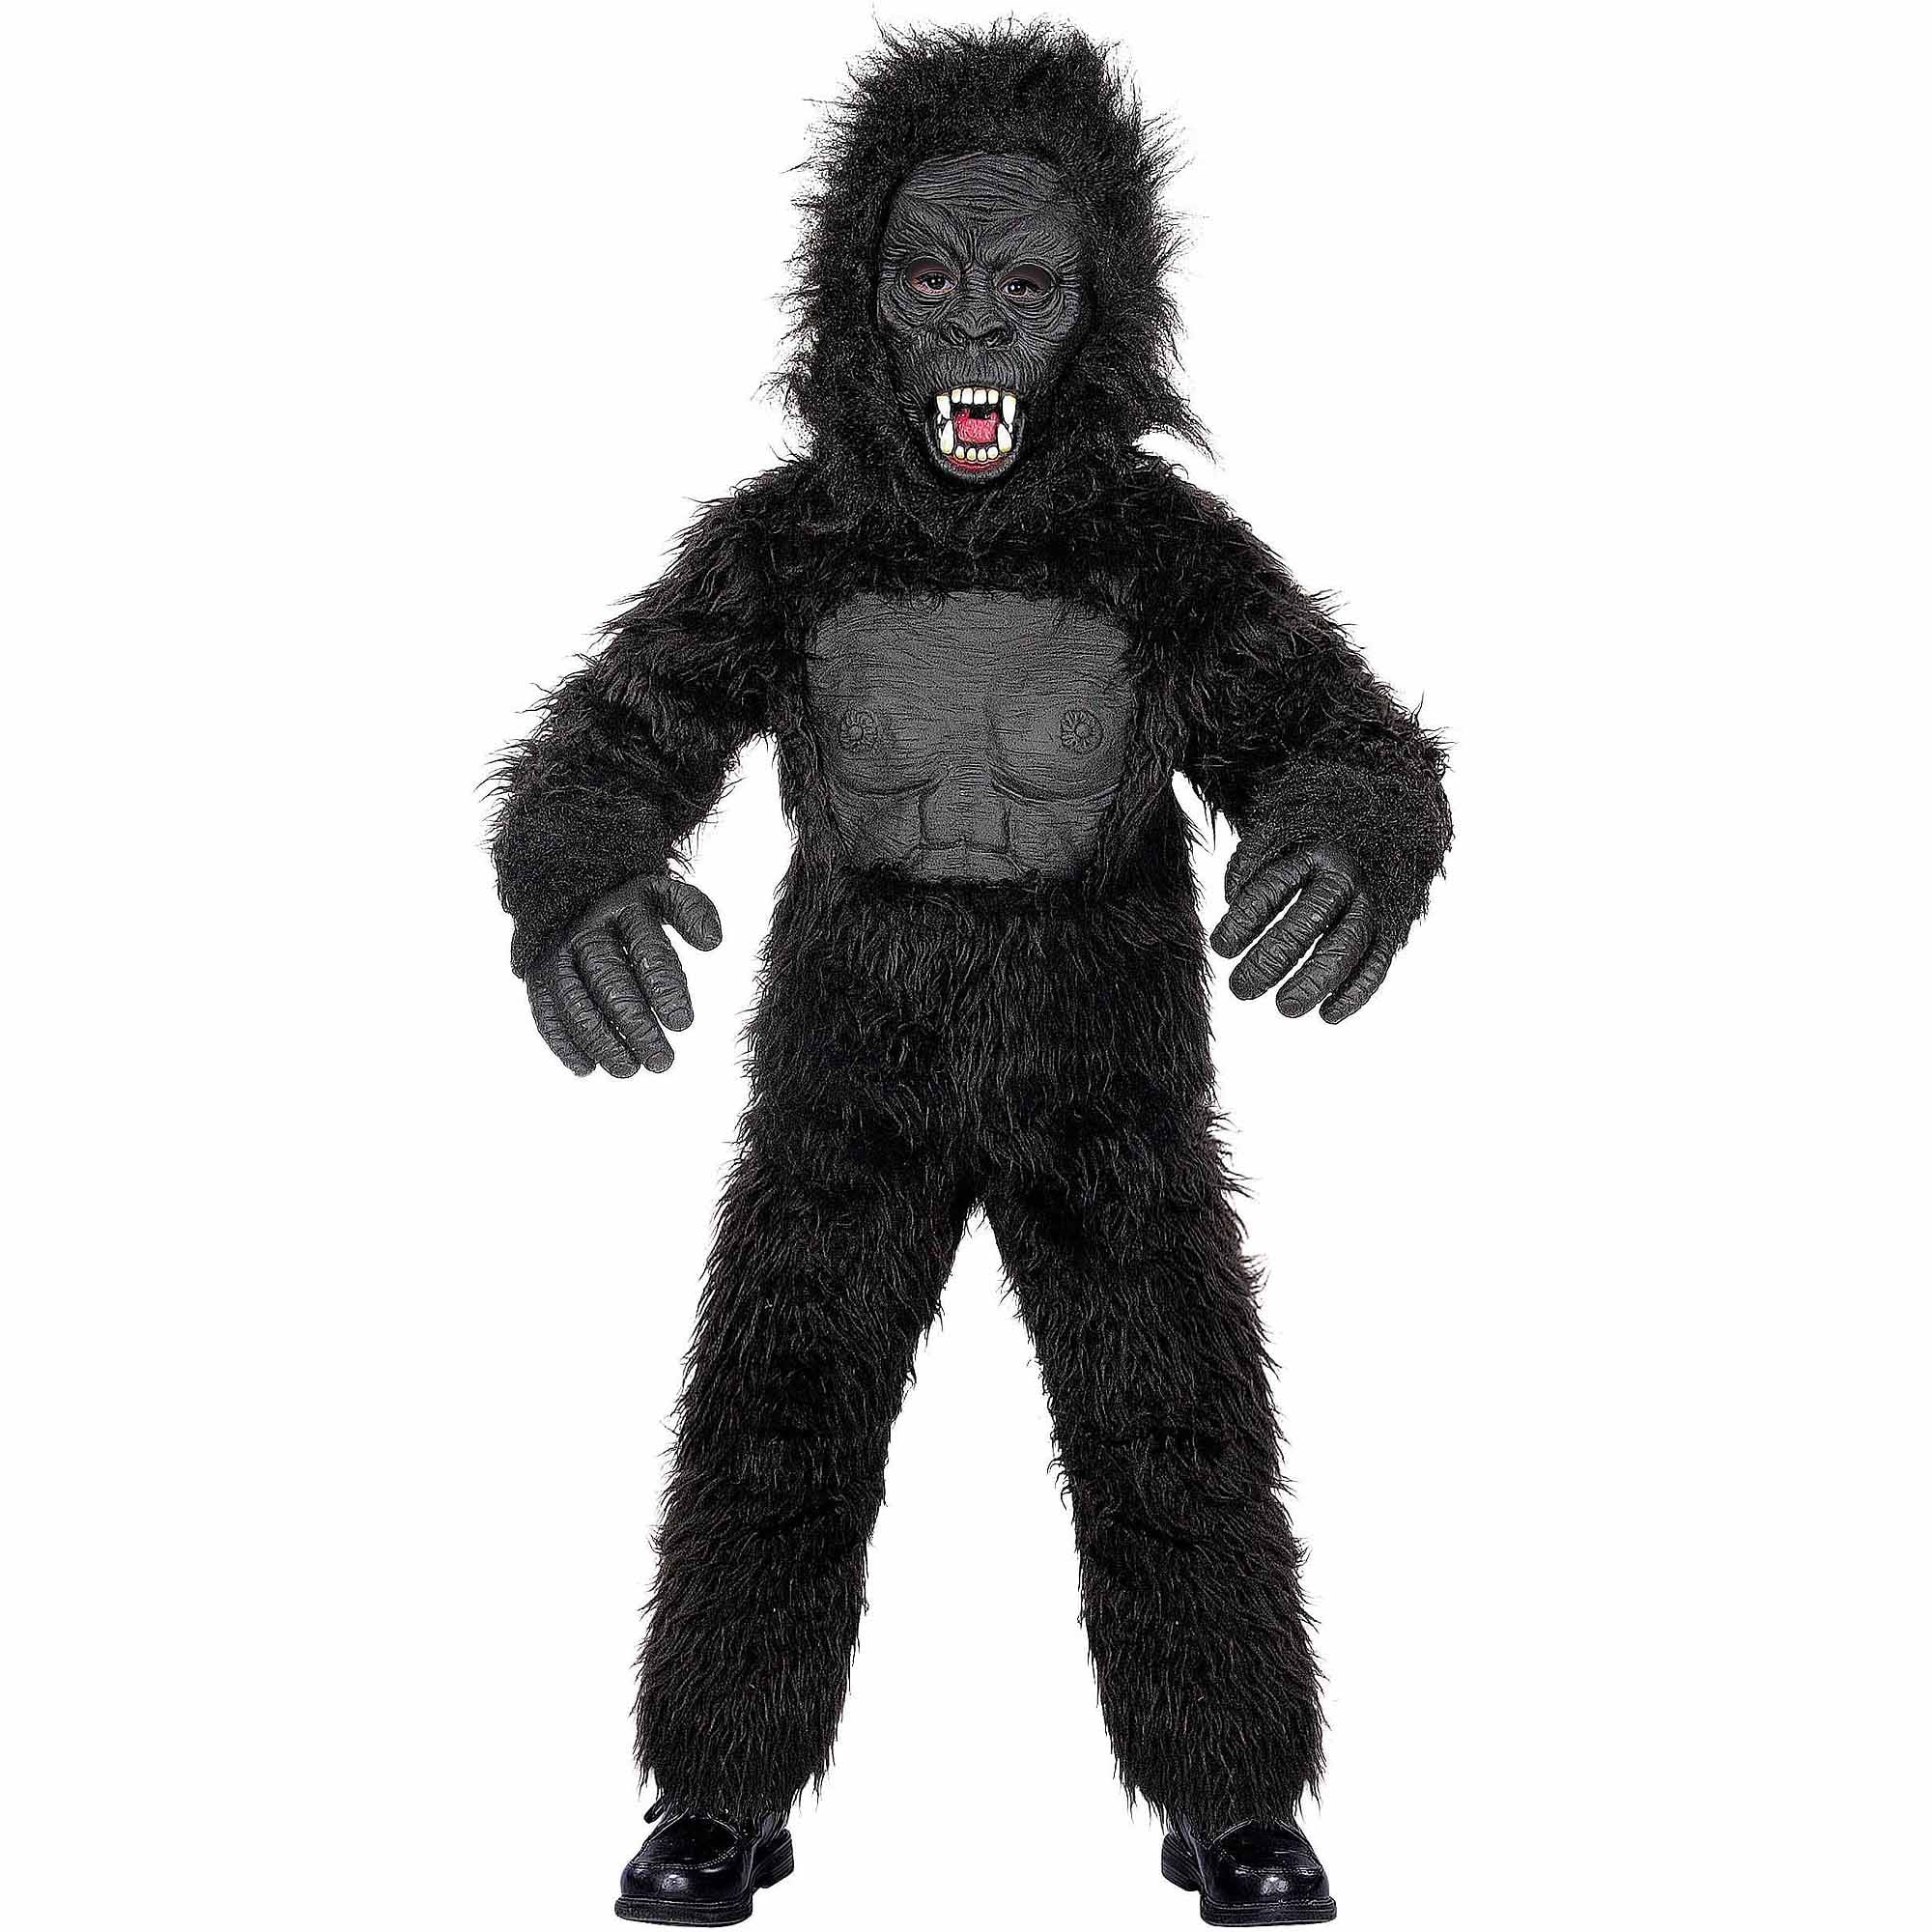 EXPERT WILD GORILLA  ADULT COSTUME monkey party suit SCARY dressup halloween new 